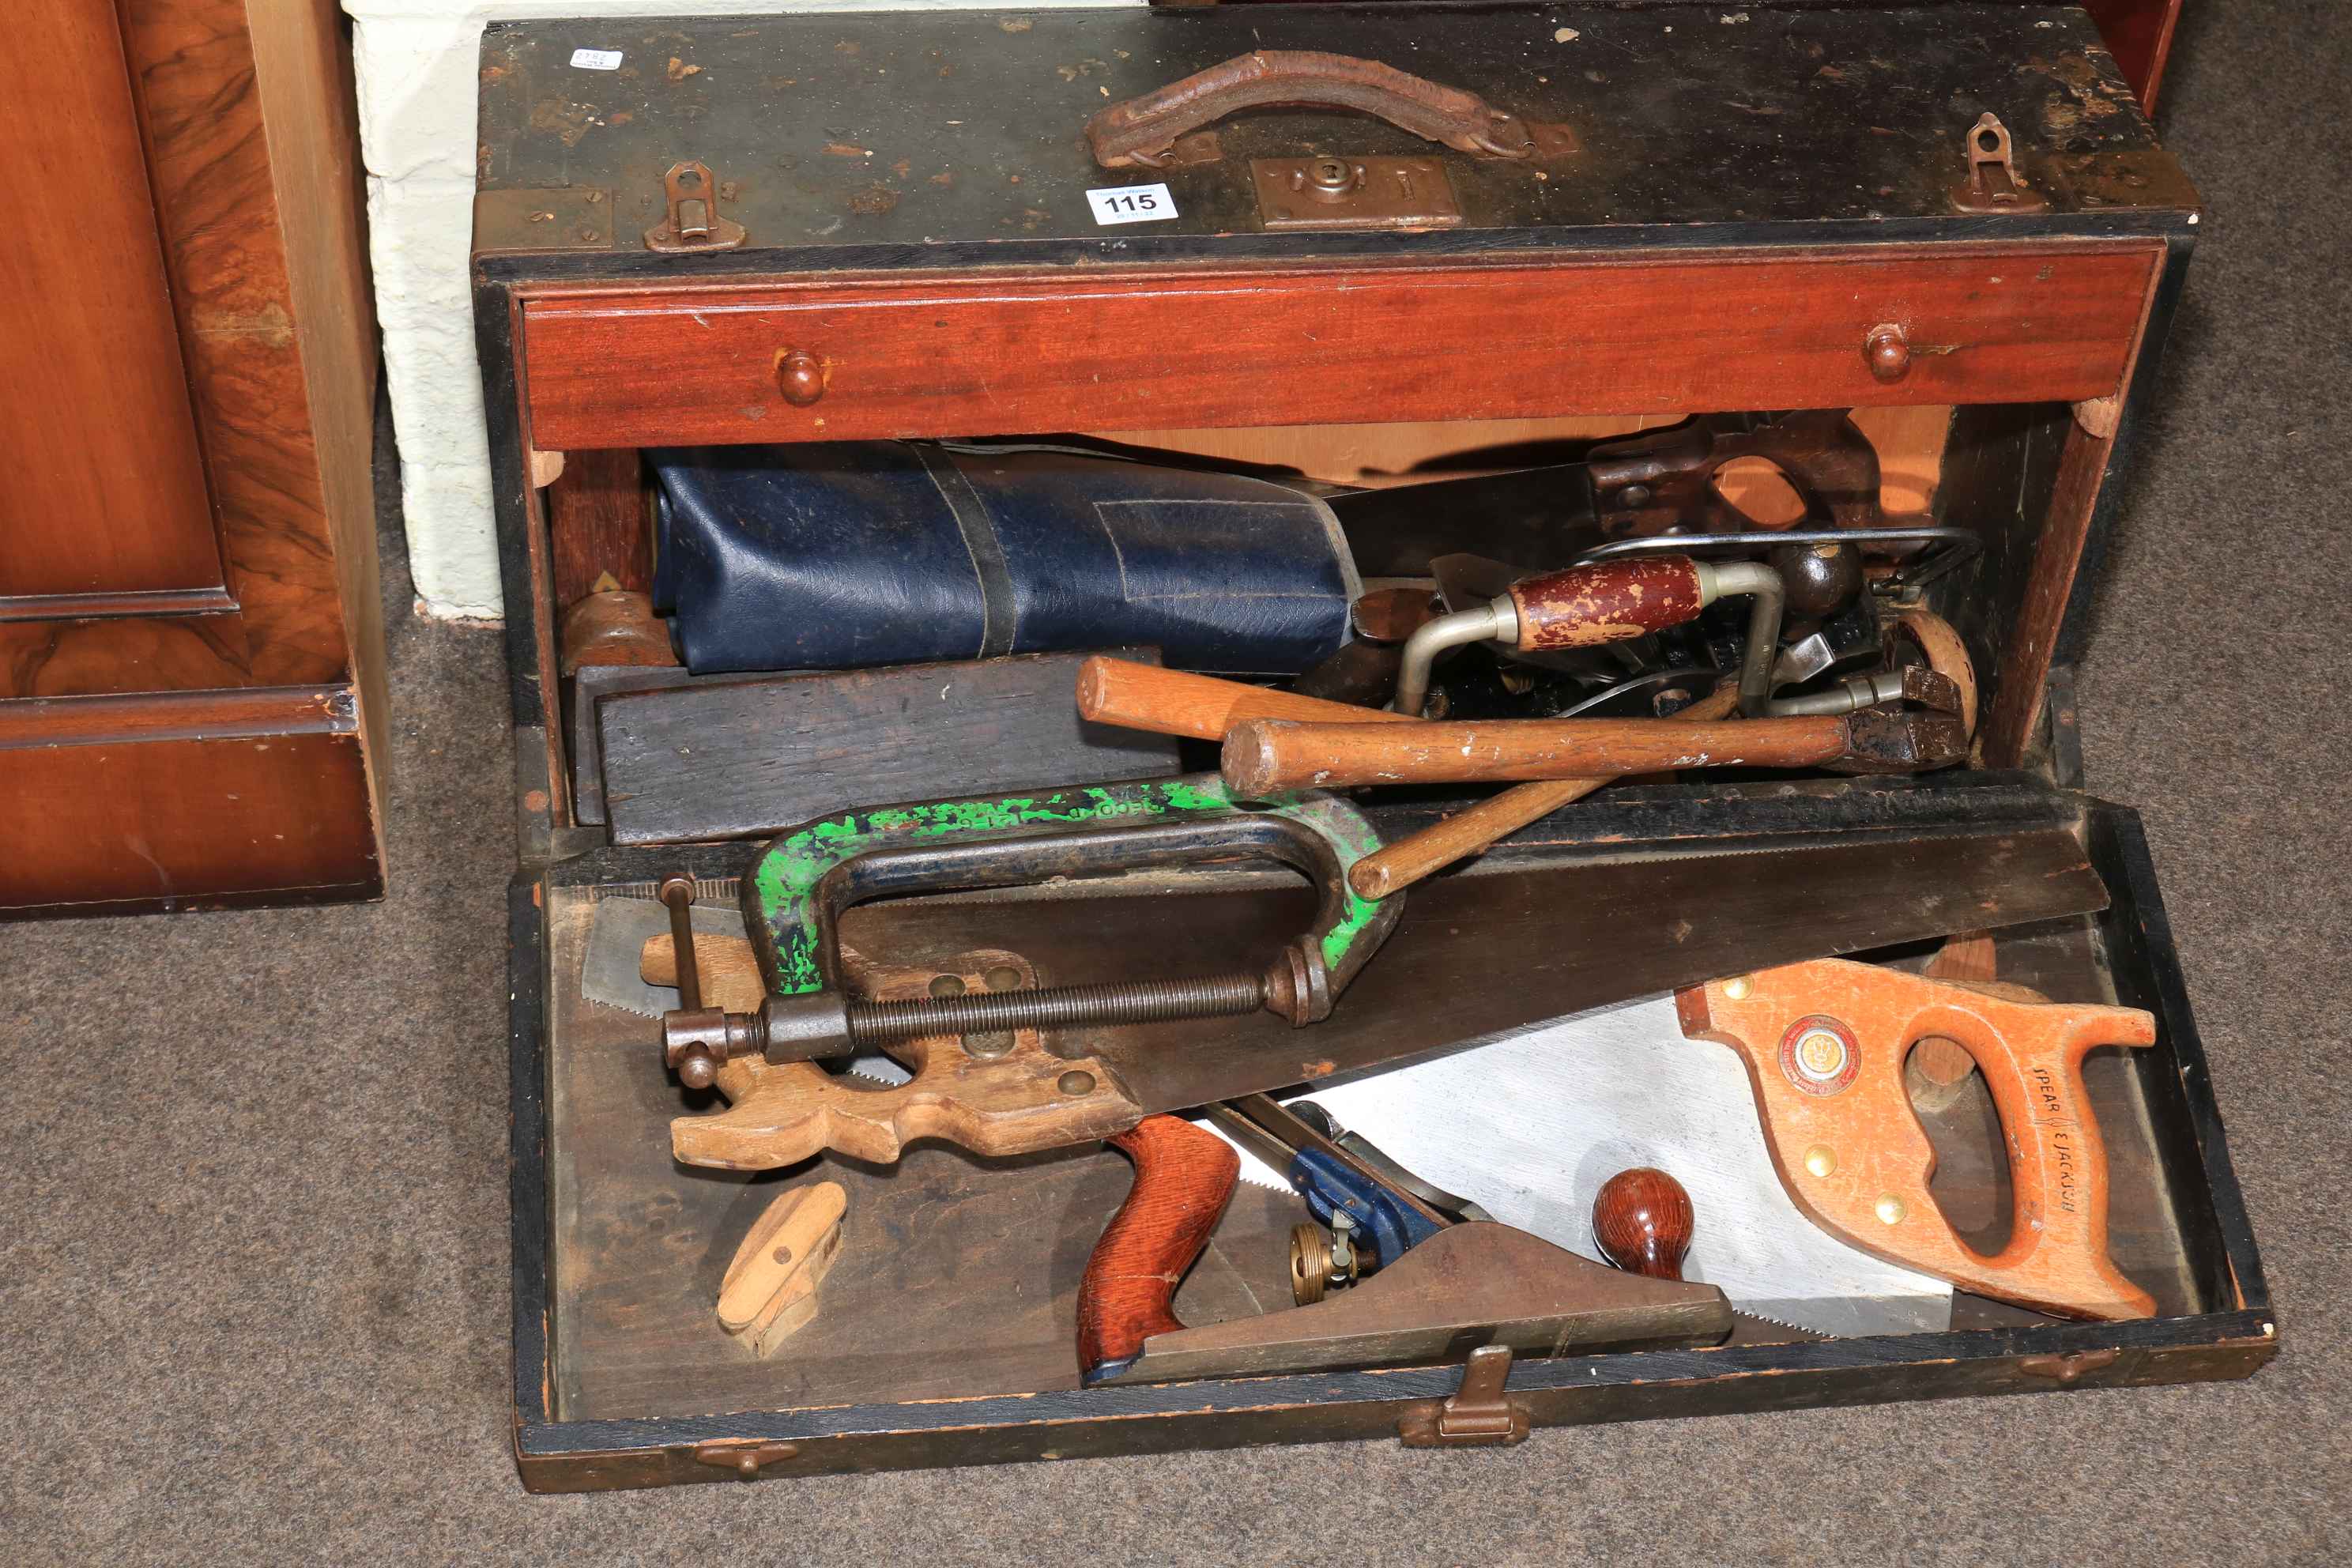 Joiners tool box and tools including record plane, clamps, chisels, etc.